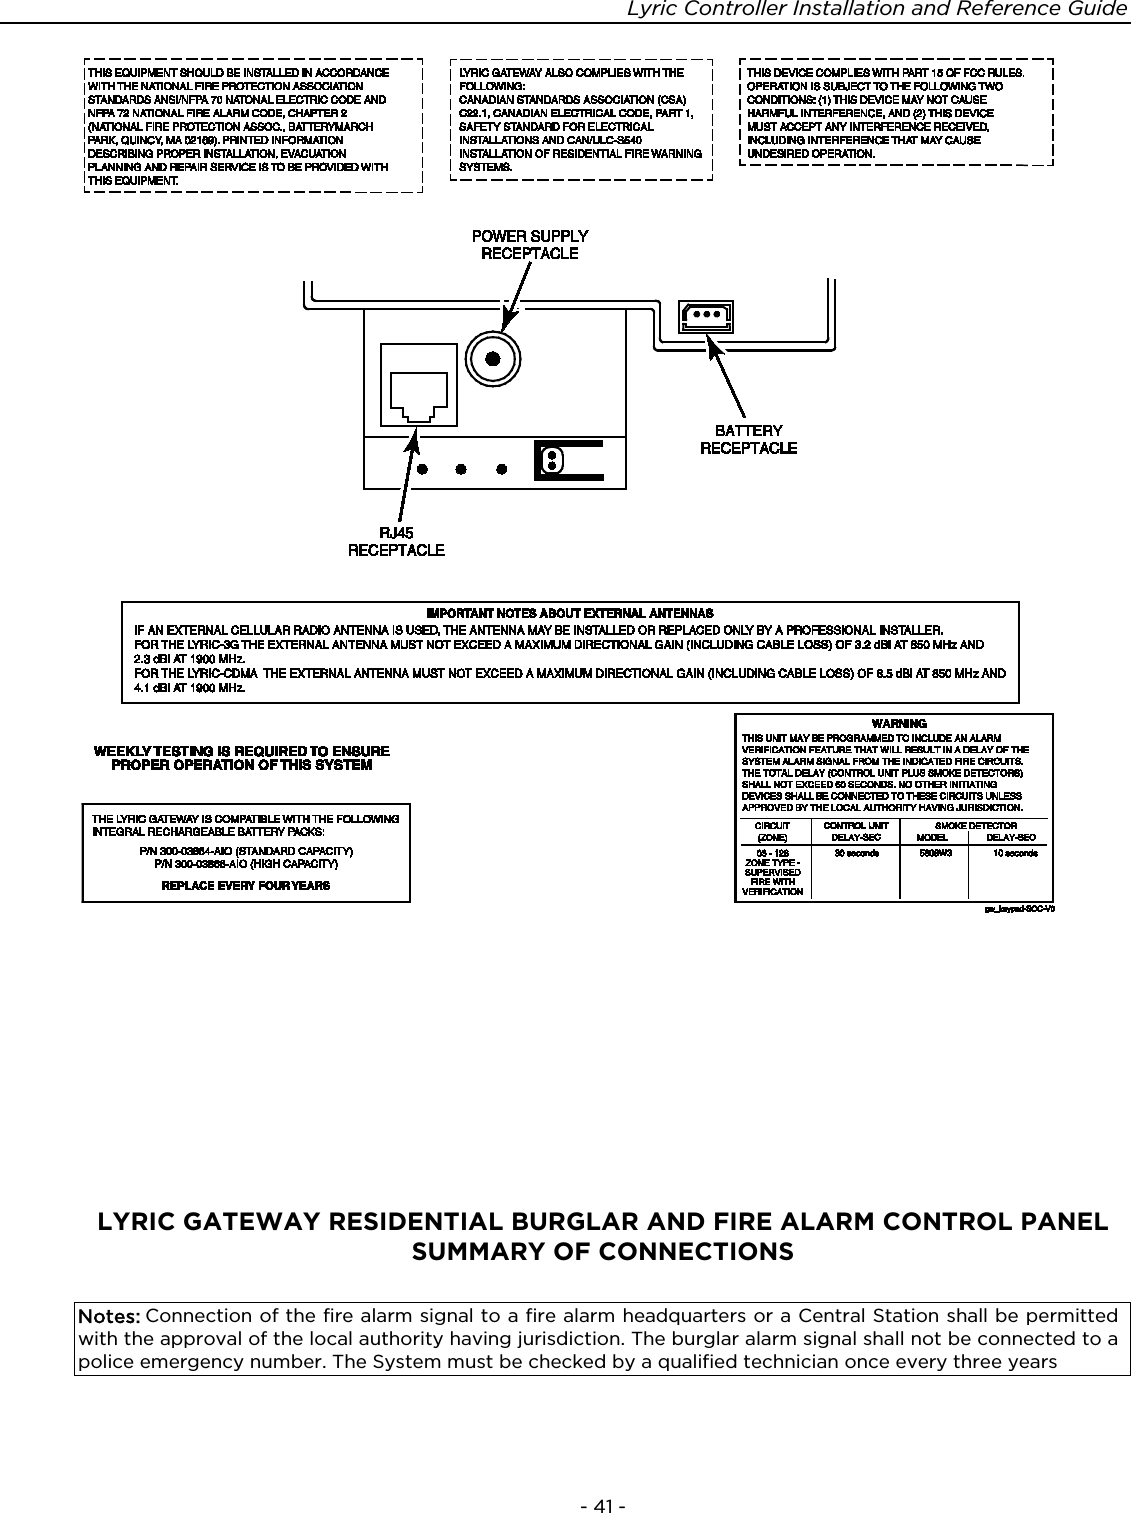 Lyric Controller Installation and Reference Guide    - 41 -                 LYRIC GATEWAY RESIDENTIAL BURGLAR AND FIRE ALARM CONTROL PANEL SUMMARY OF CONNECTIONS   Notes: Connection of the fire alarm signal to a fire alarm headquarters or a Central Station shall be permitted with the approval of the local authority having jurisdiction. The burglar alarm signal shall not be connected to a police emergency number. The System must be checked by a qualified technician once every three years 